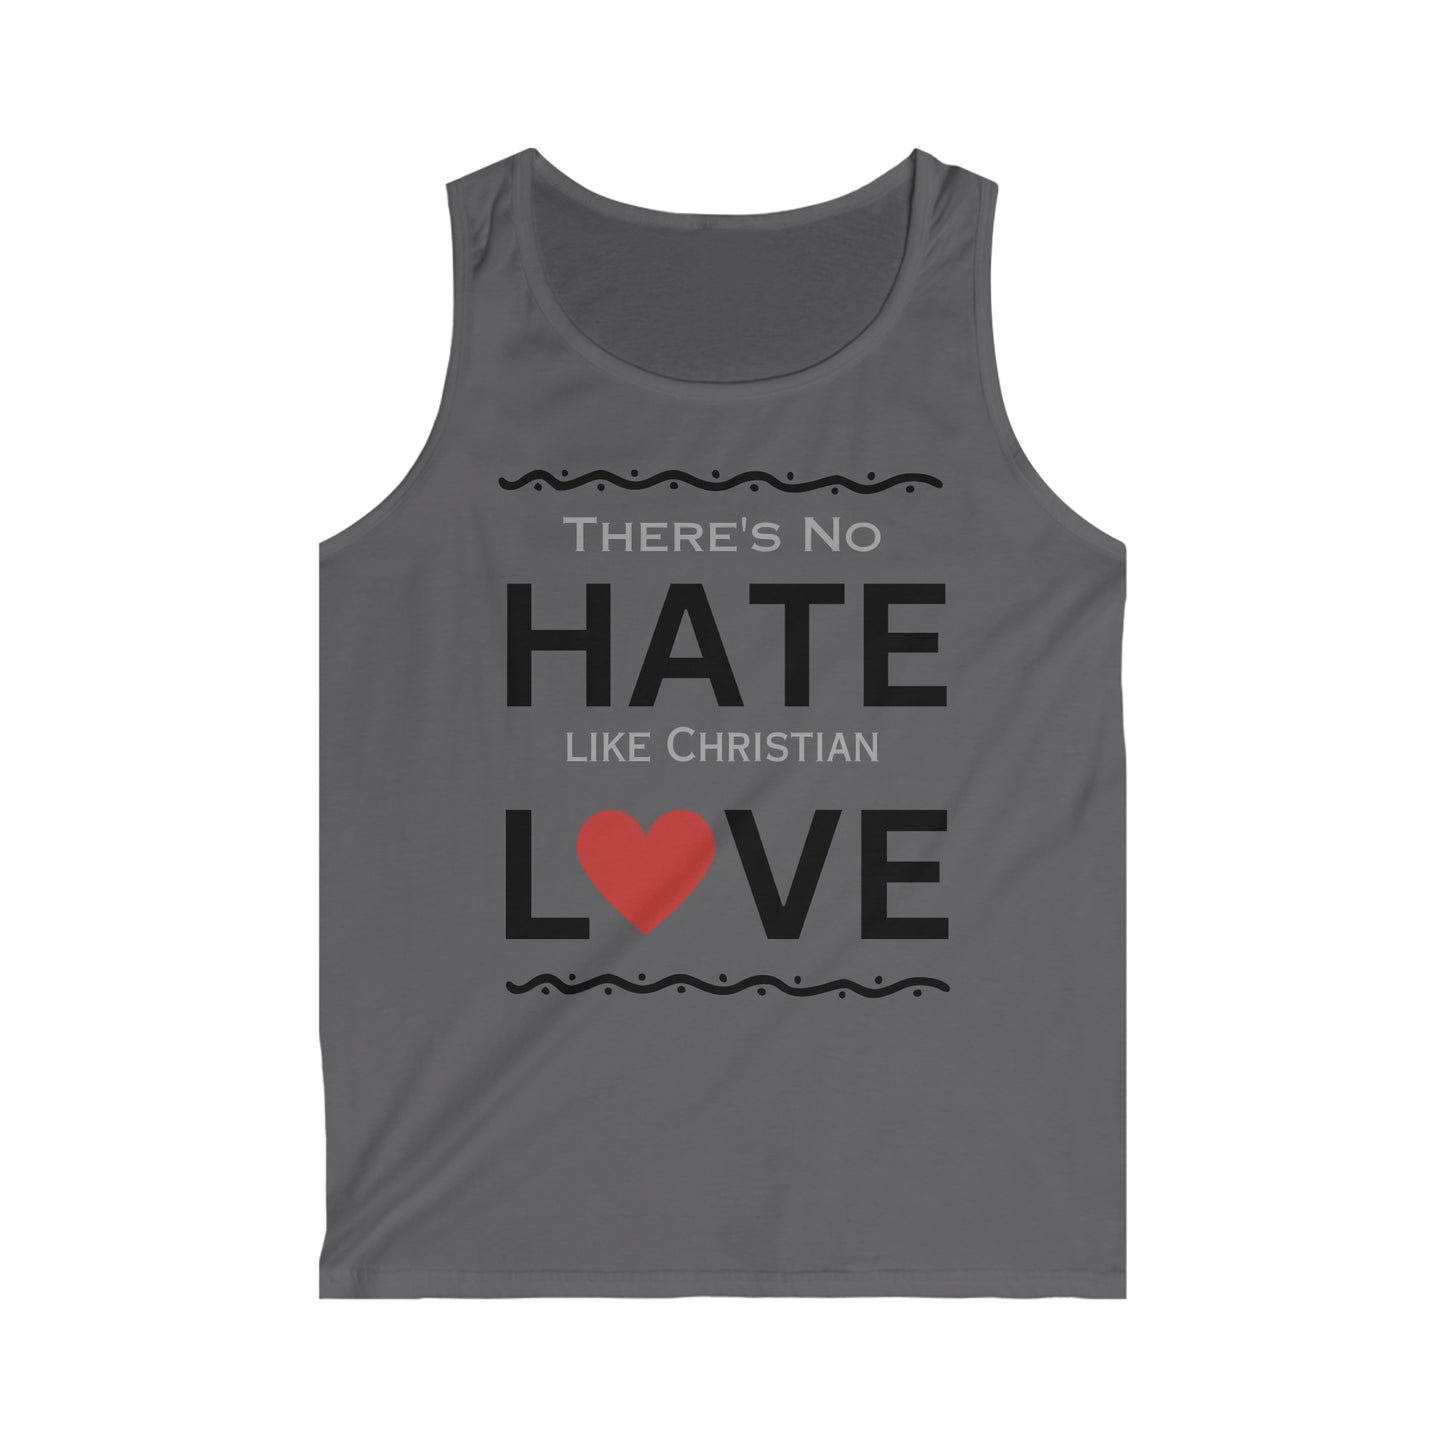 There's No Hate Like Christian Love Men's Tank Top